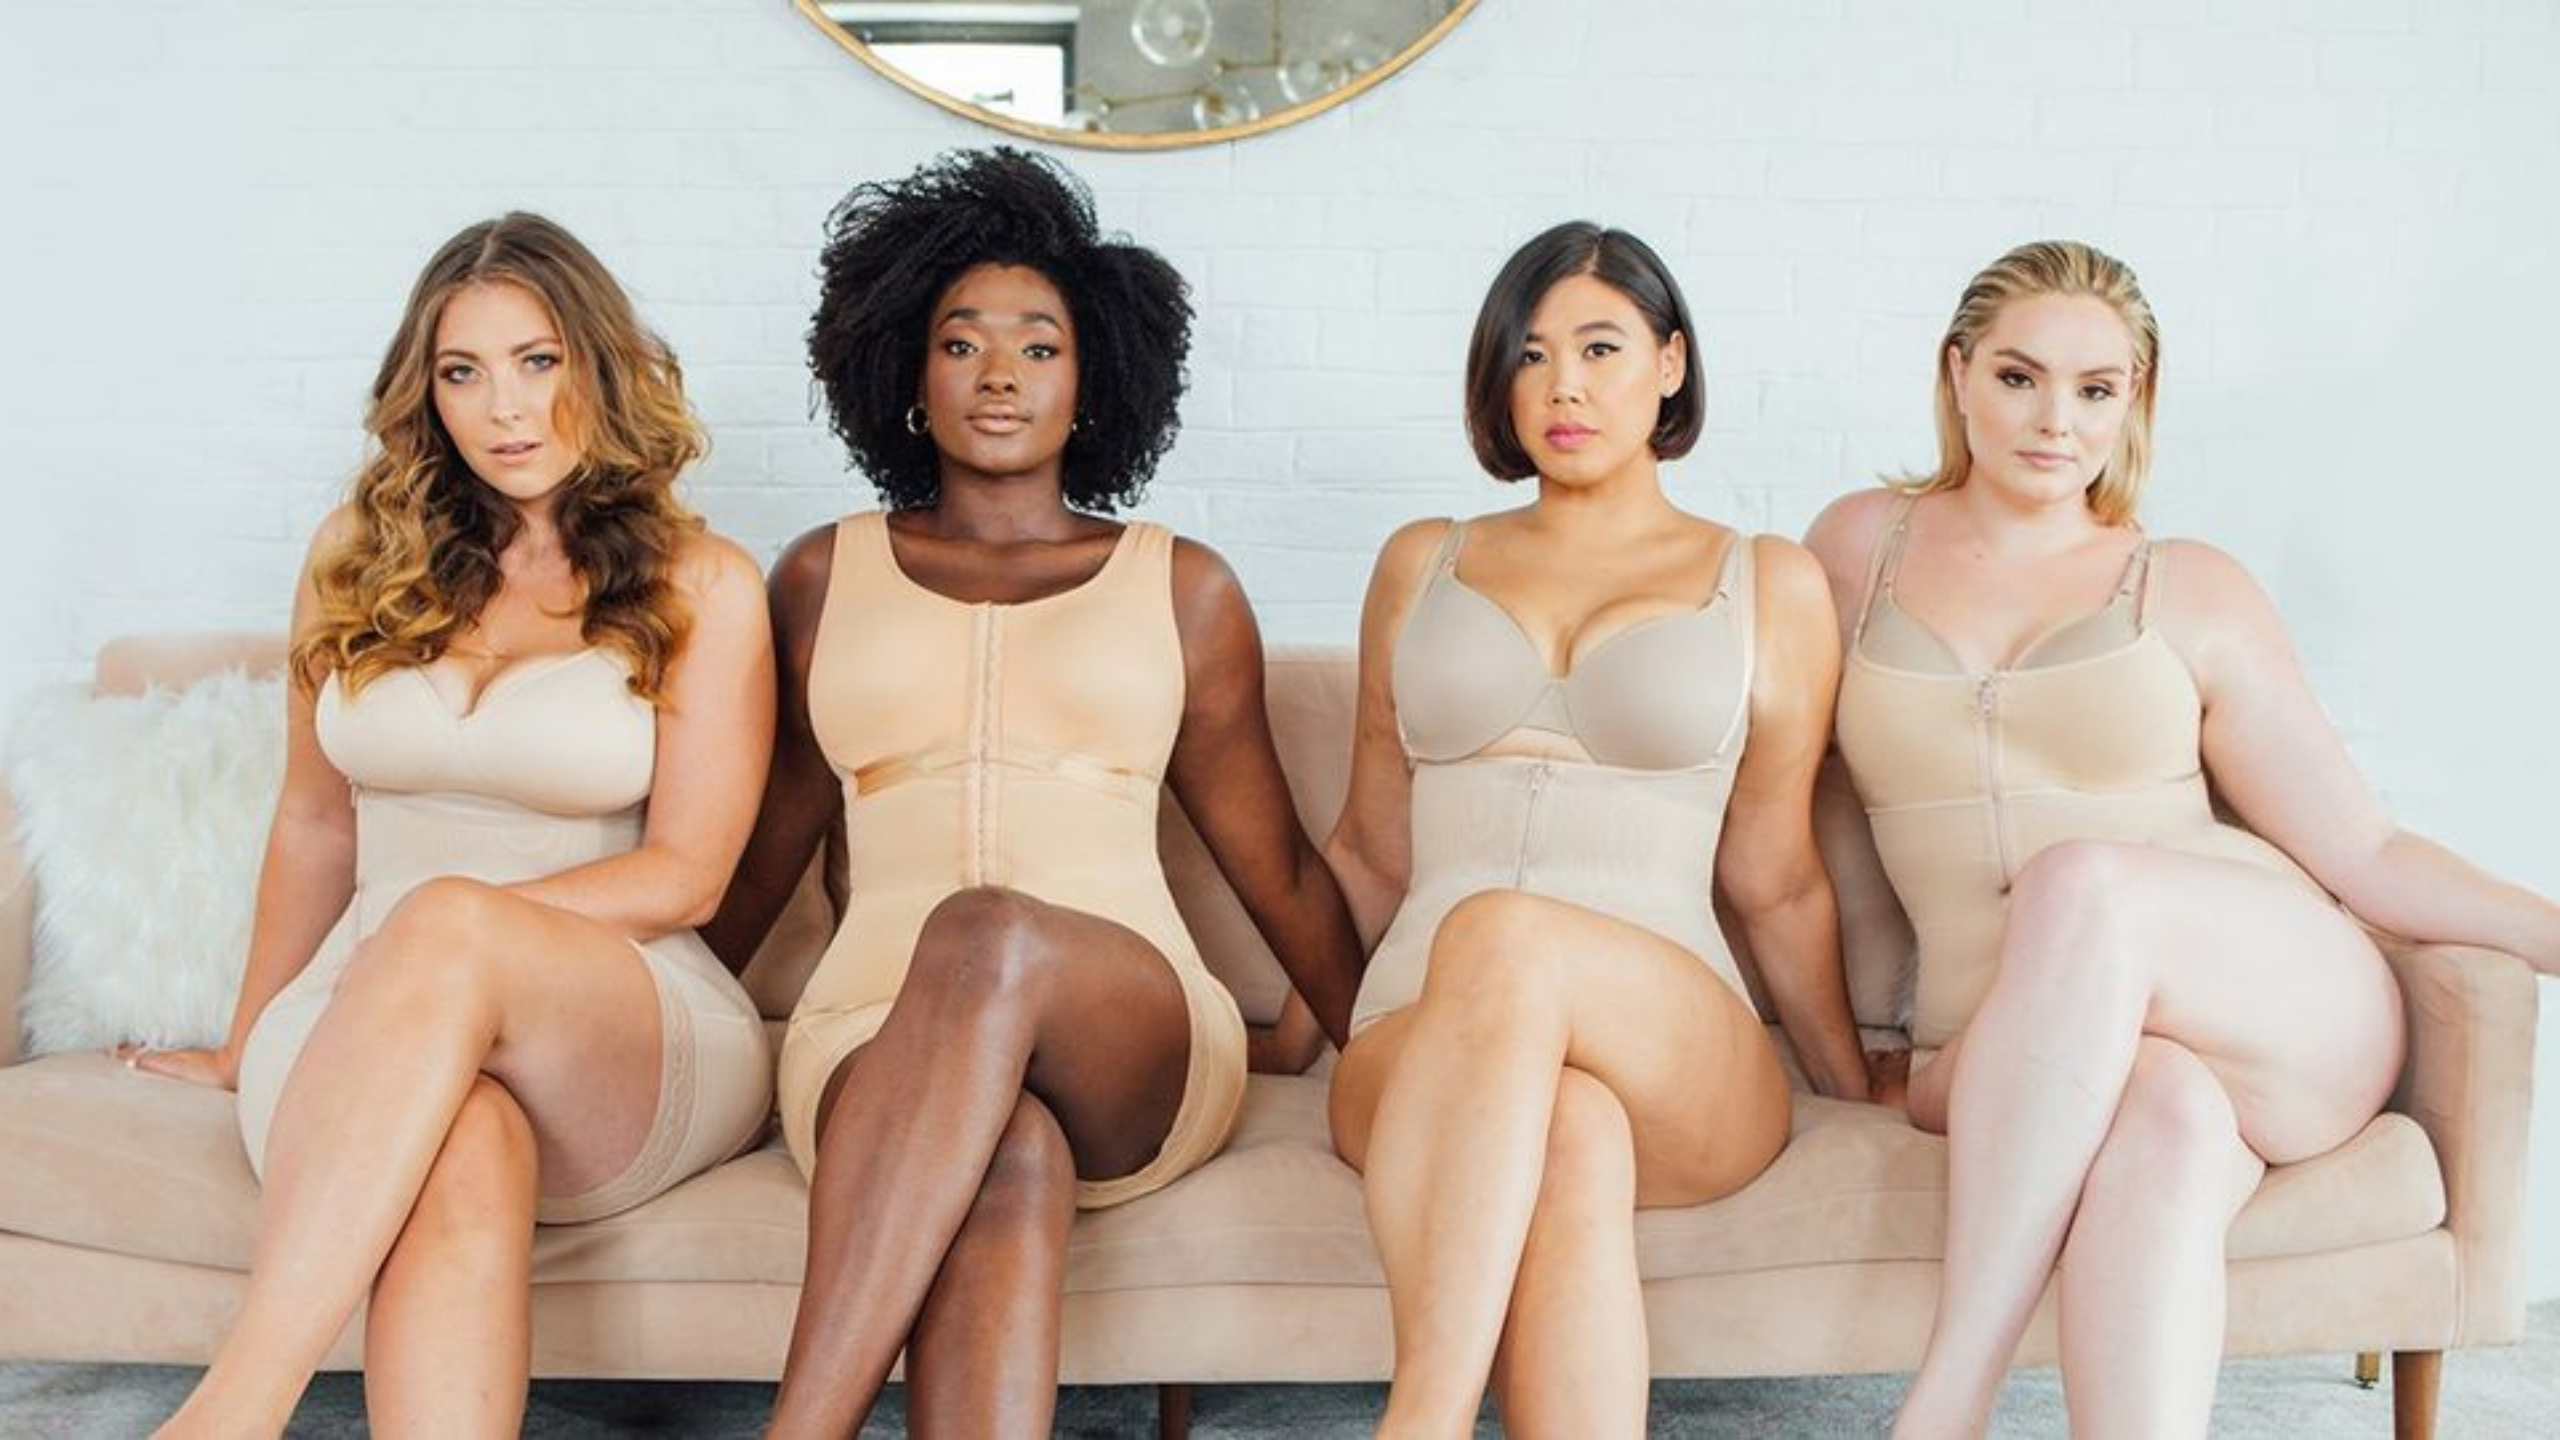 5 Tips to Feel Confident and Stylish in Shapellx Shapewear • Jeane